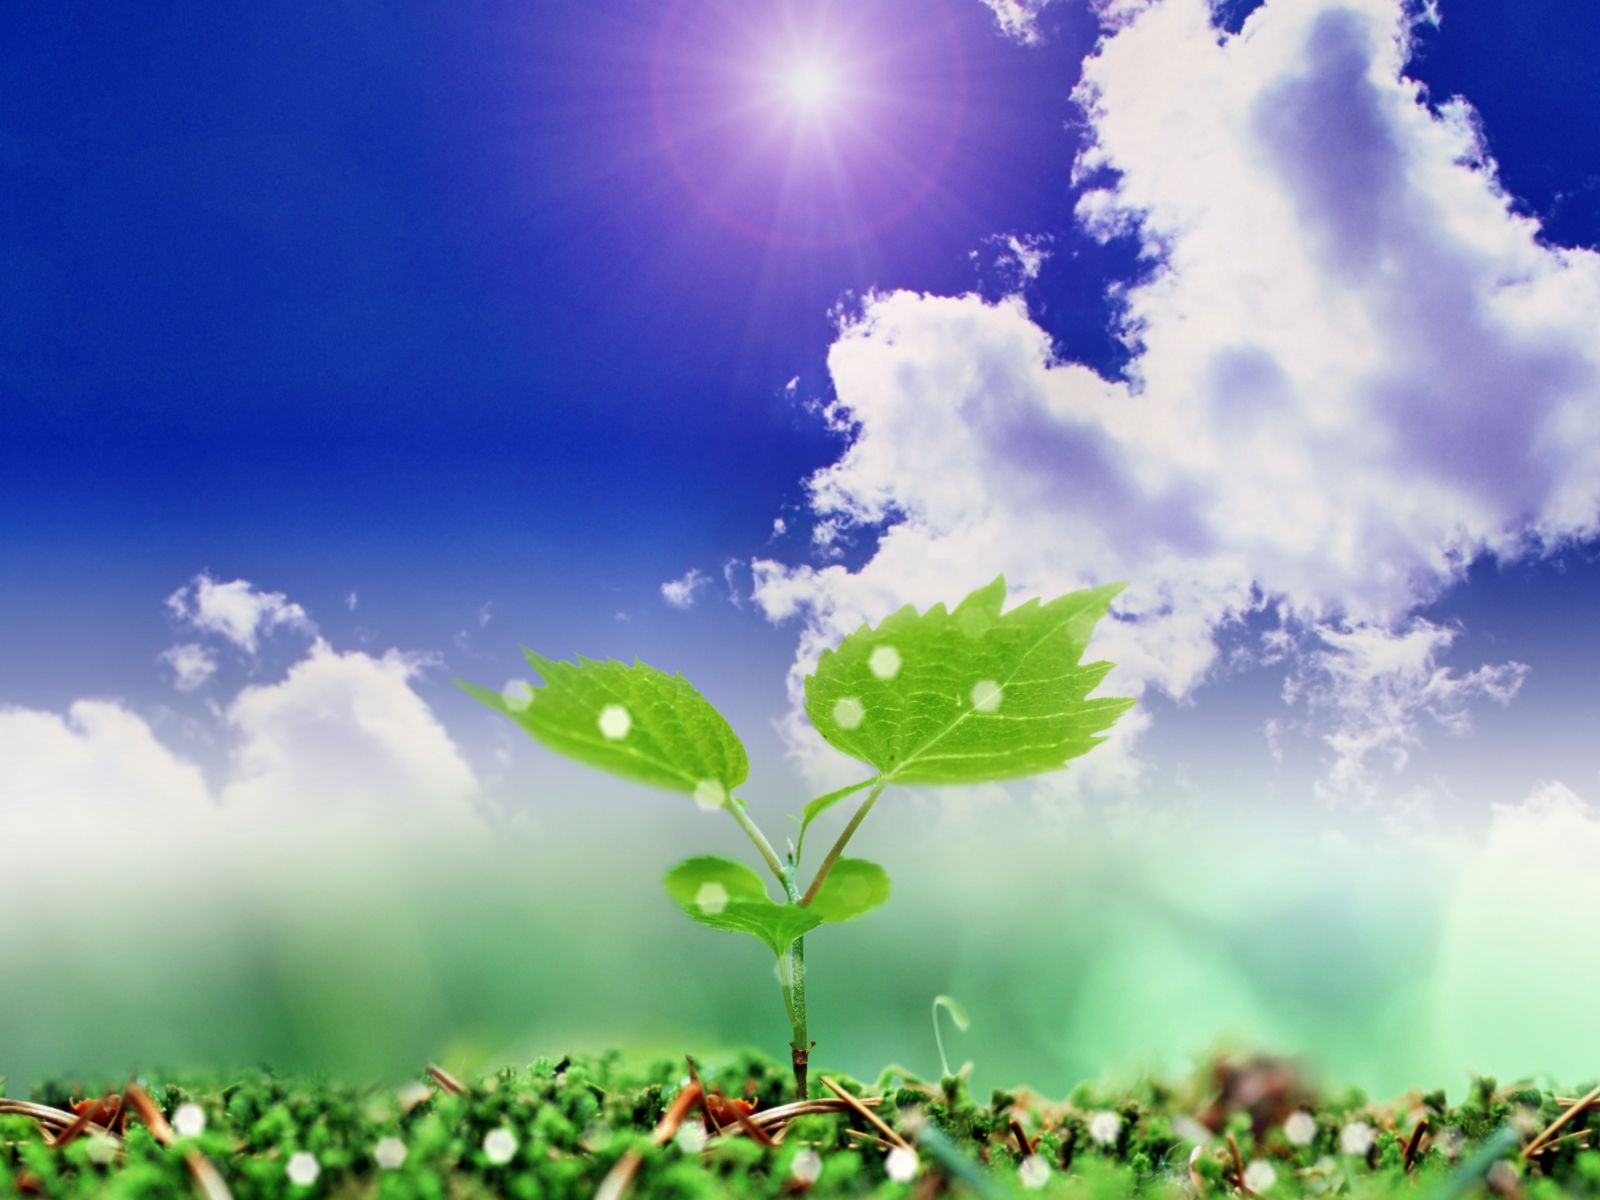 Plant and Clouds powerpoint background